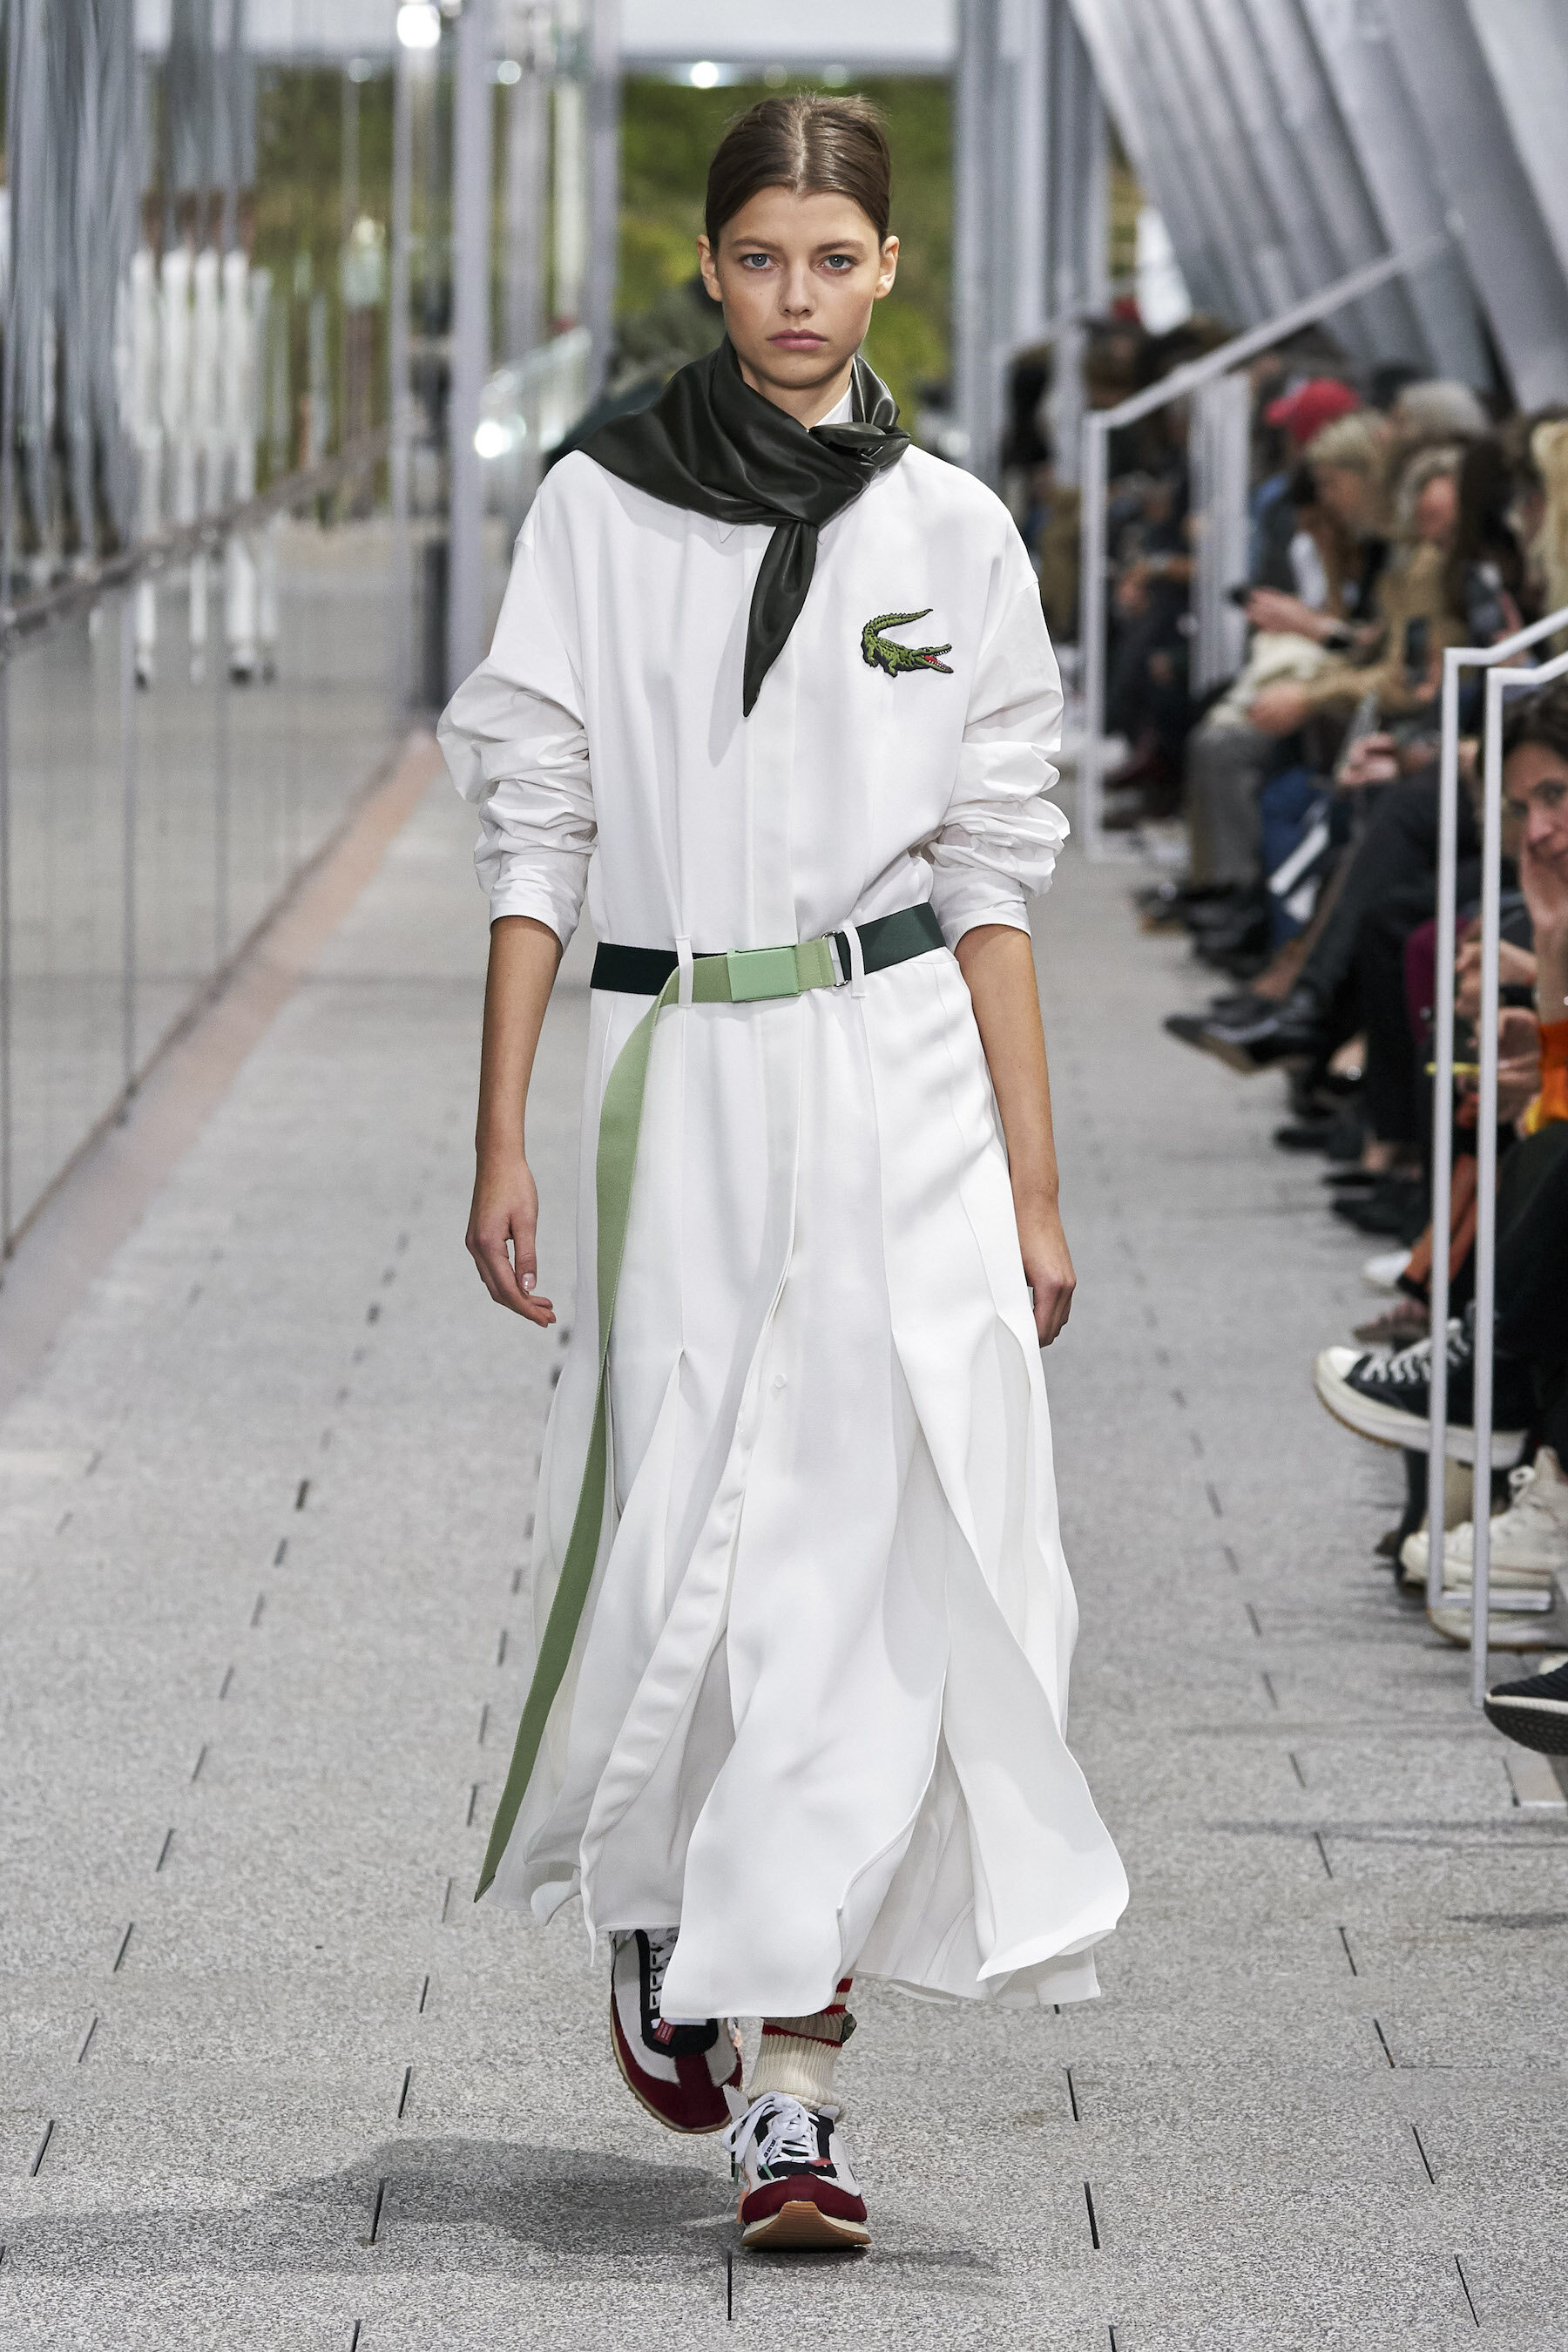 Lacoste SS20_LOOK 39 by Alessandro Lucioni  Imaxtree.com.jpg